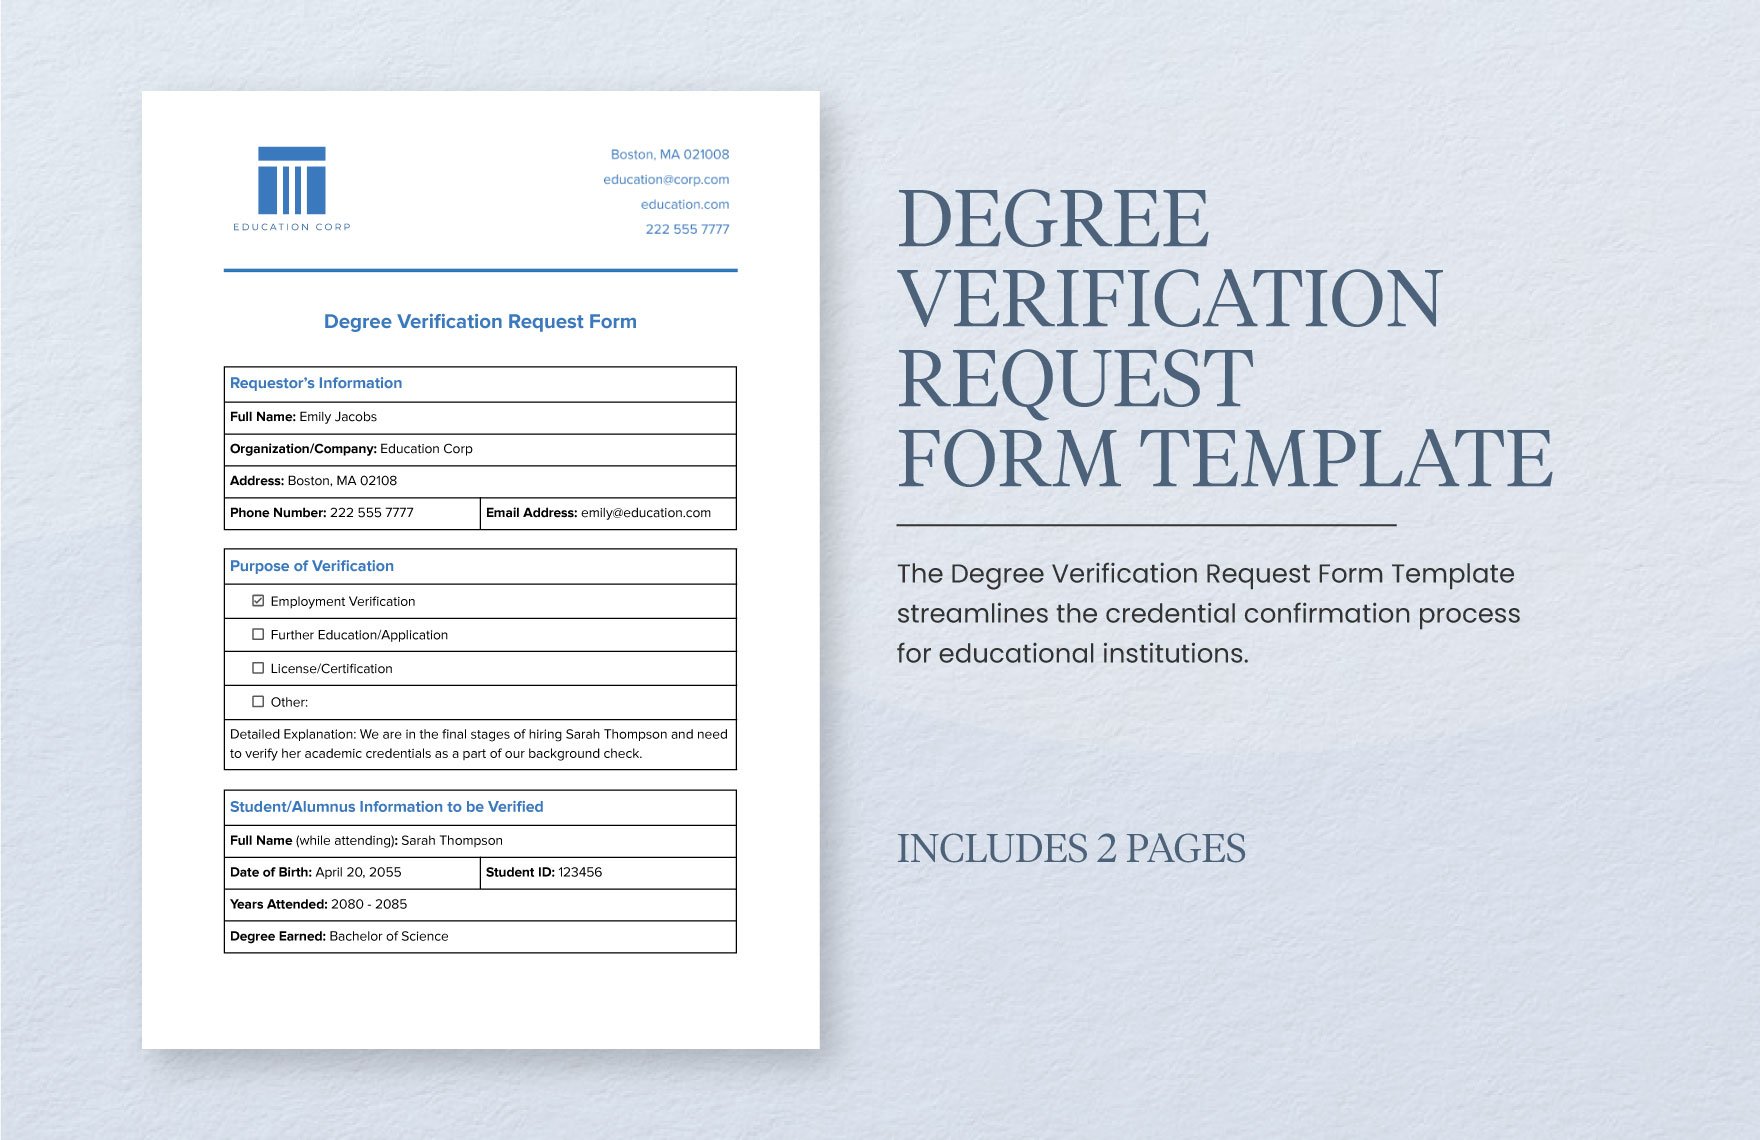 Degree Verification Request Form Template in Word, Google Docs, PDF